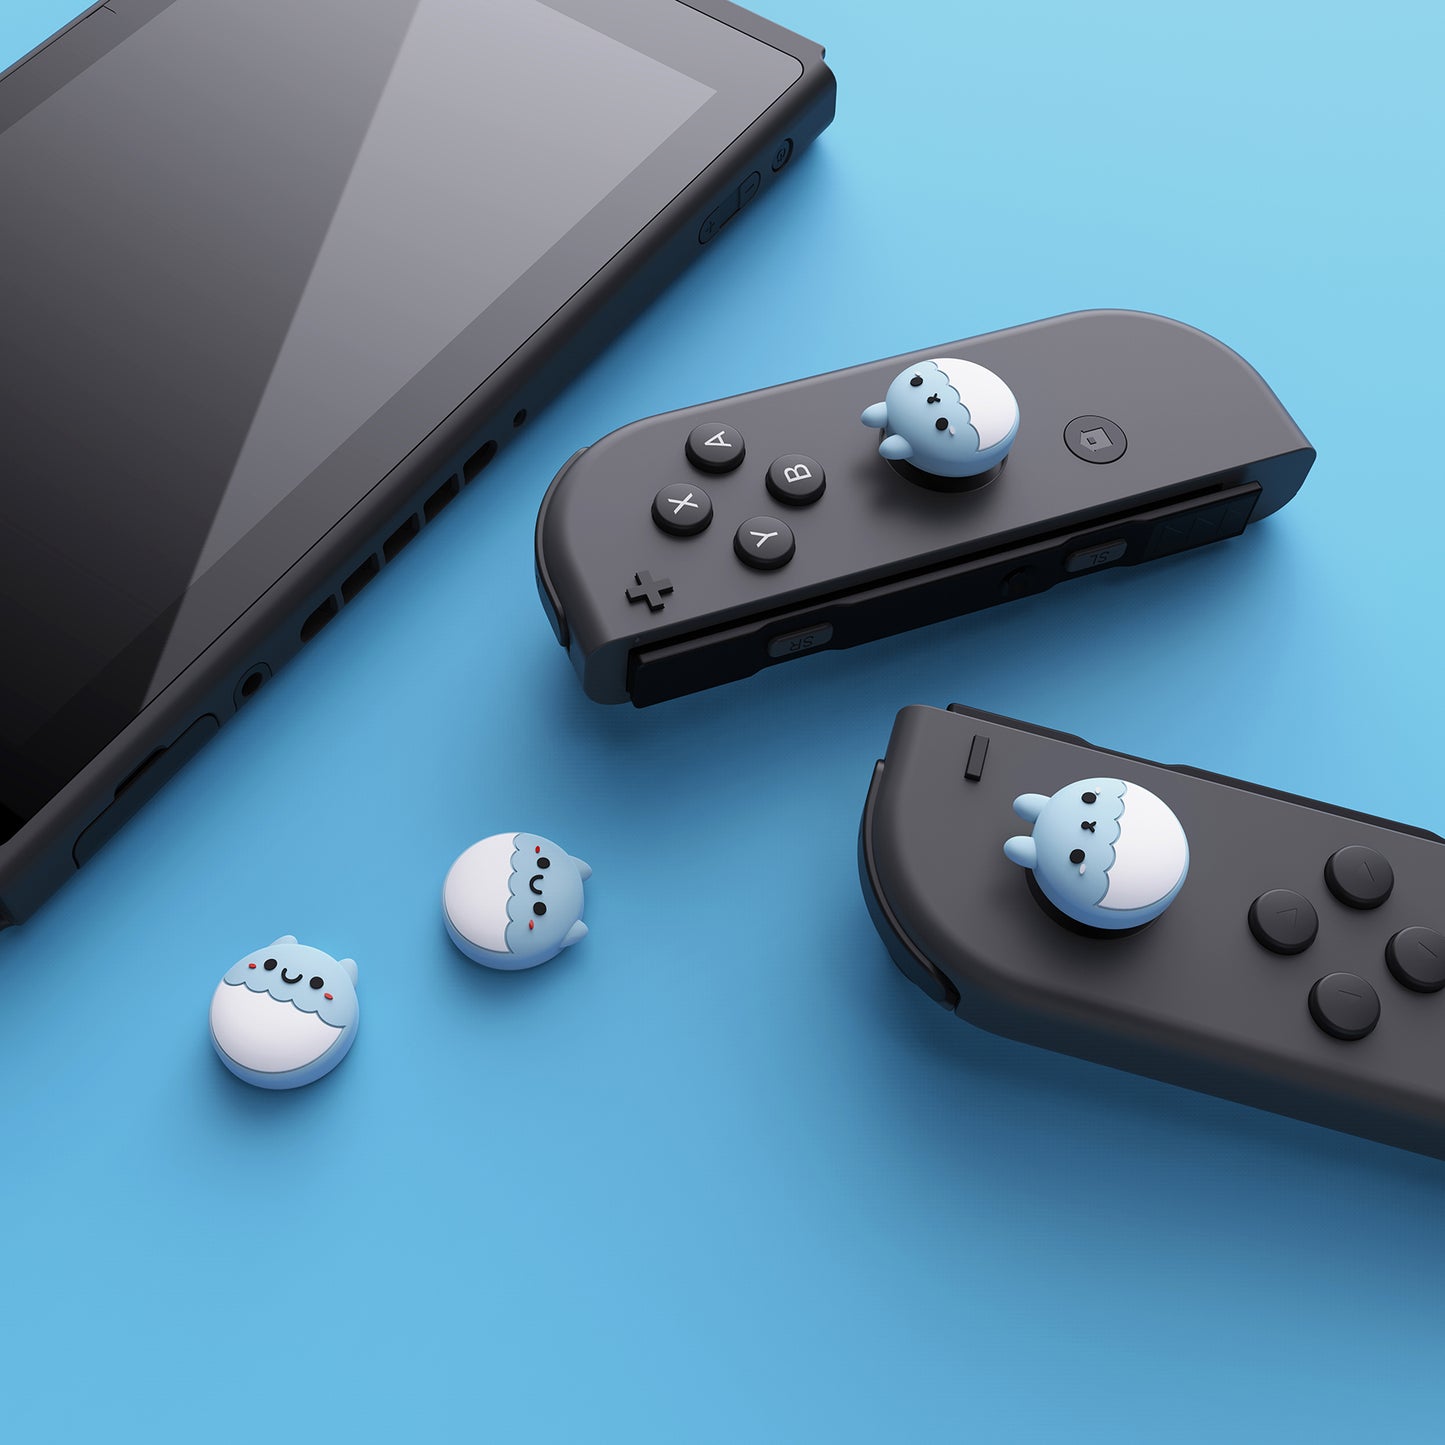 PlayVital Rabbit & Squirrel Cute Thumb Grip Caps for Nintendo Switch, Joystick Caps for Nintendo Switch Lite, Analog Cover Thumbstick Grips for OLED Joycon - Heaven Blue - NJM1117 playvital